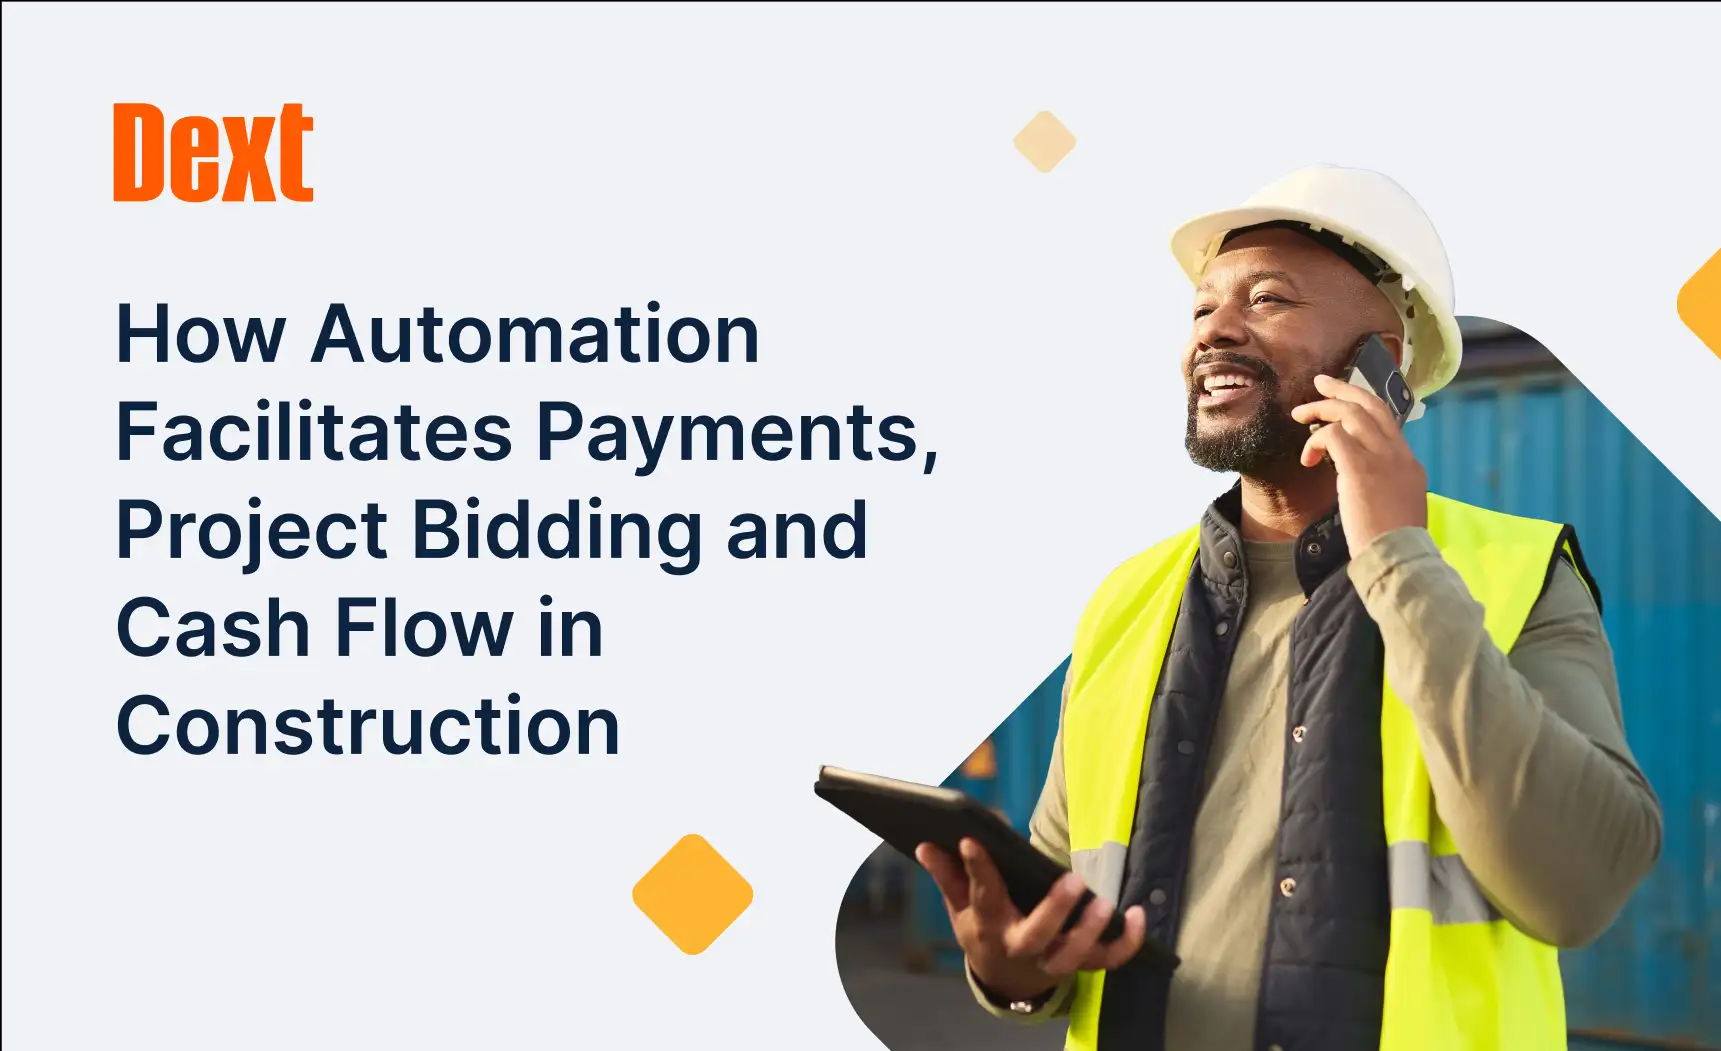 Dext: How Automation Facilitates Payments, Project Bidding and Cash Flow in Construction  image